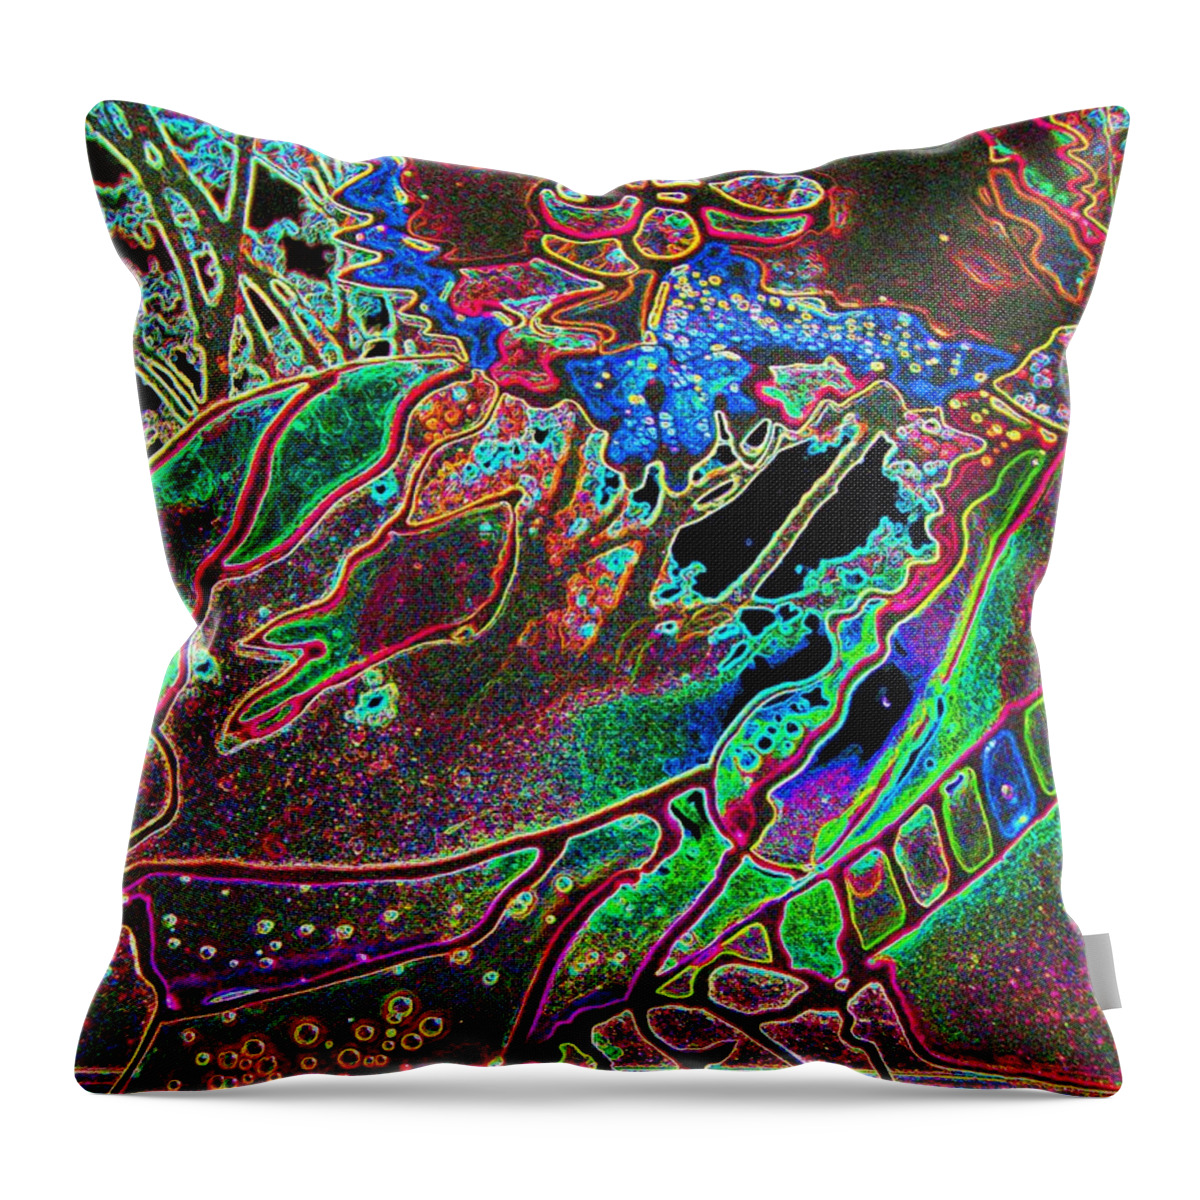 Jerry Throw Pillow featuring the photograph In And Out Of The Garden Stained Glass by Susan Carella